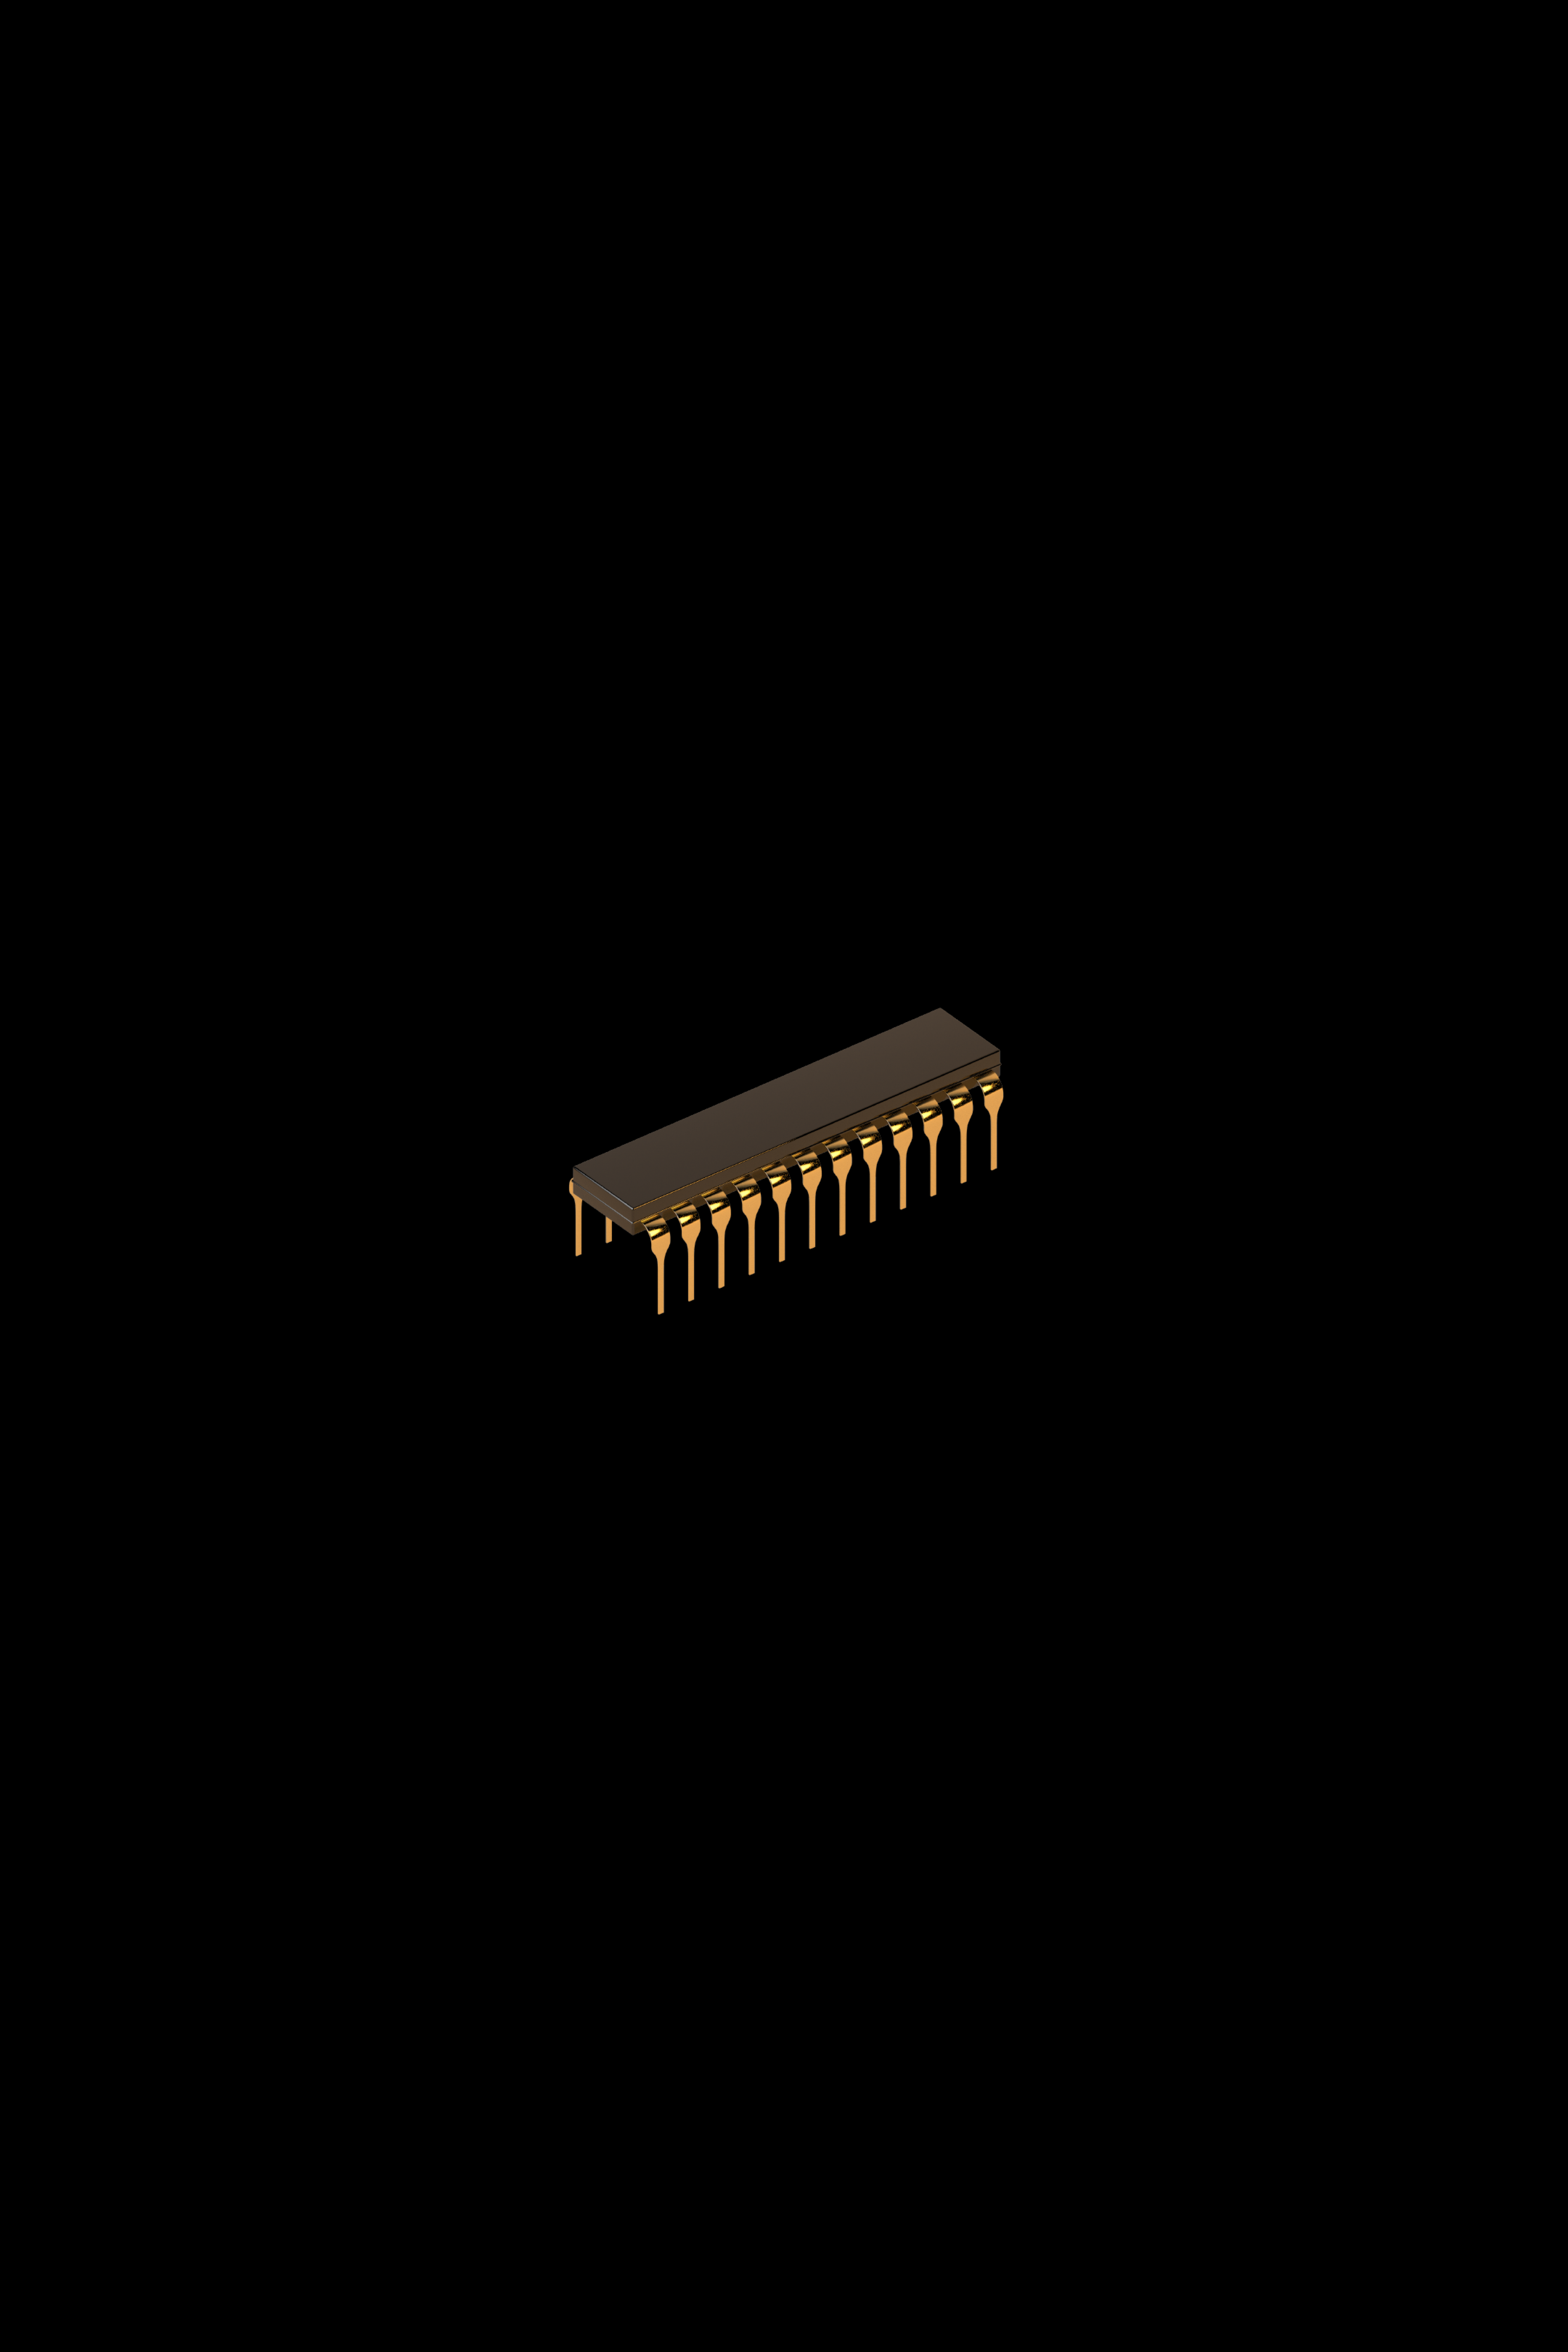 3D rendering of a small golden microchip on a black background.